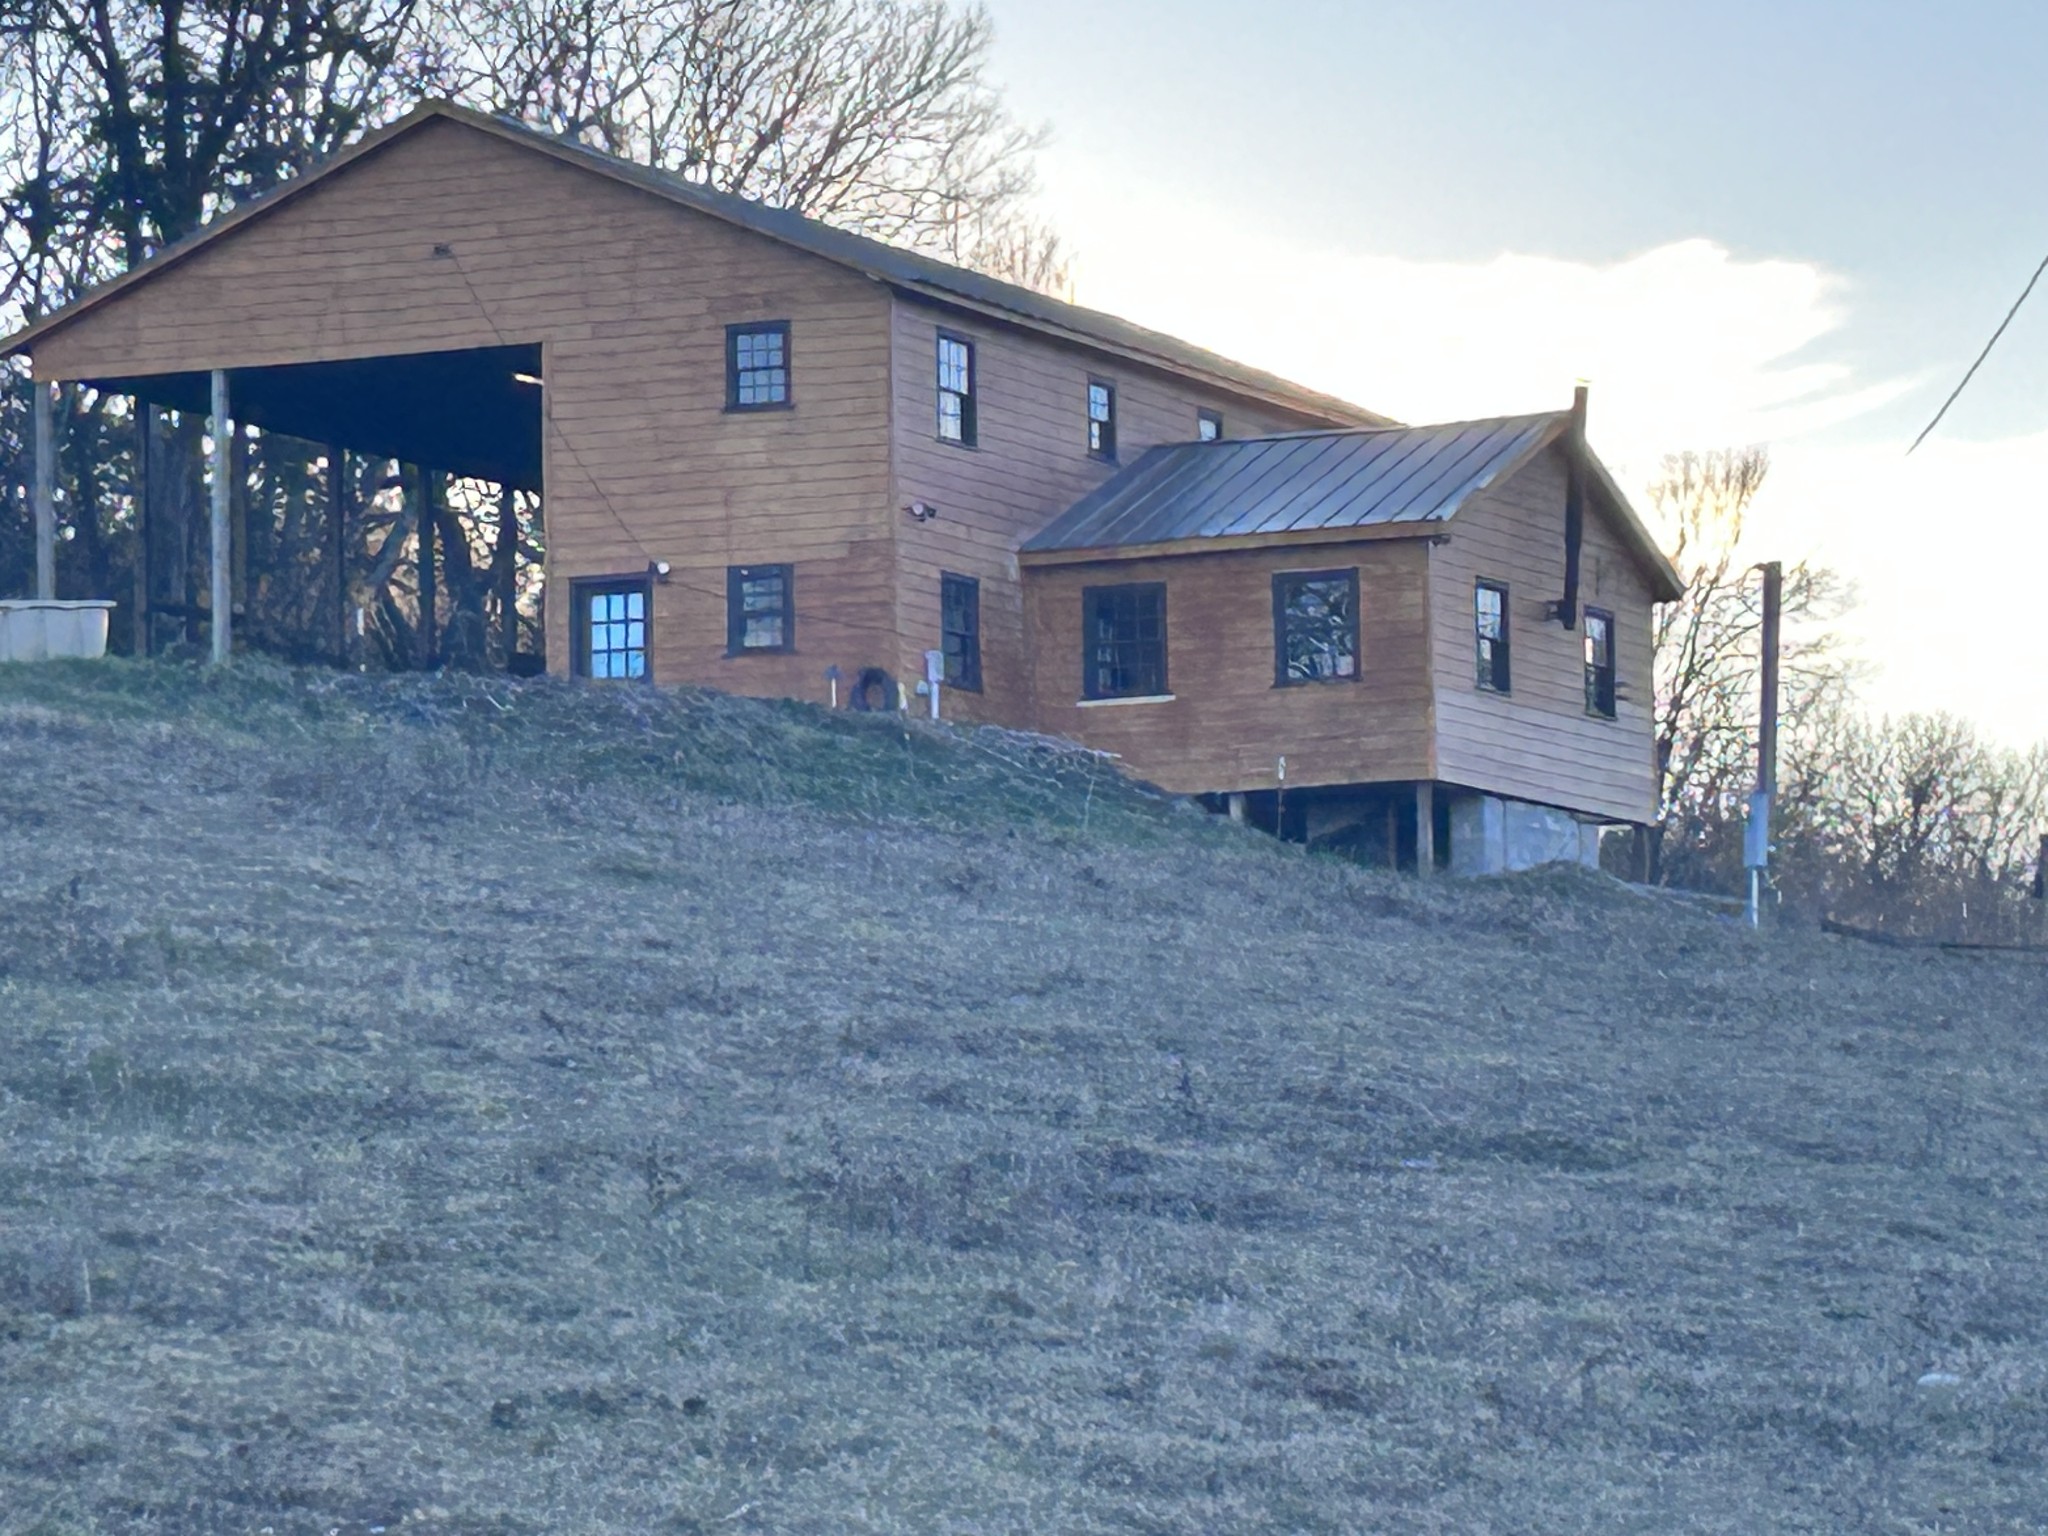 View Prospect, TN 38477 house